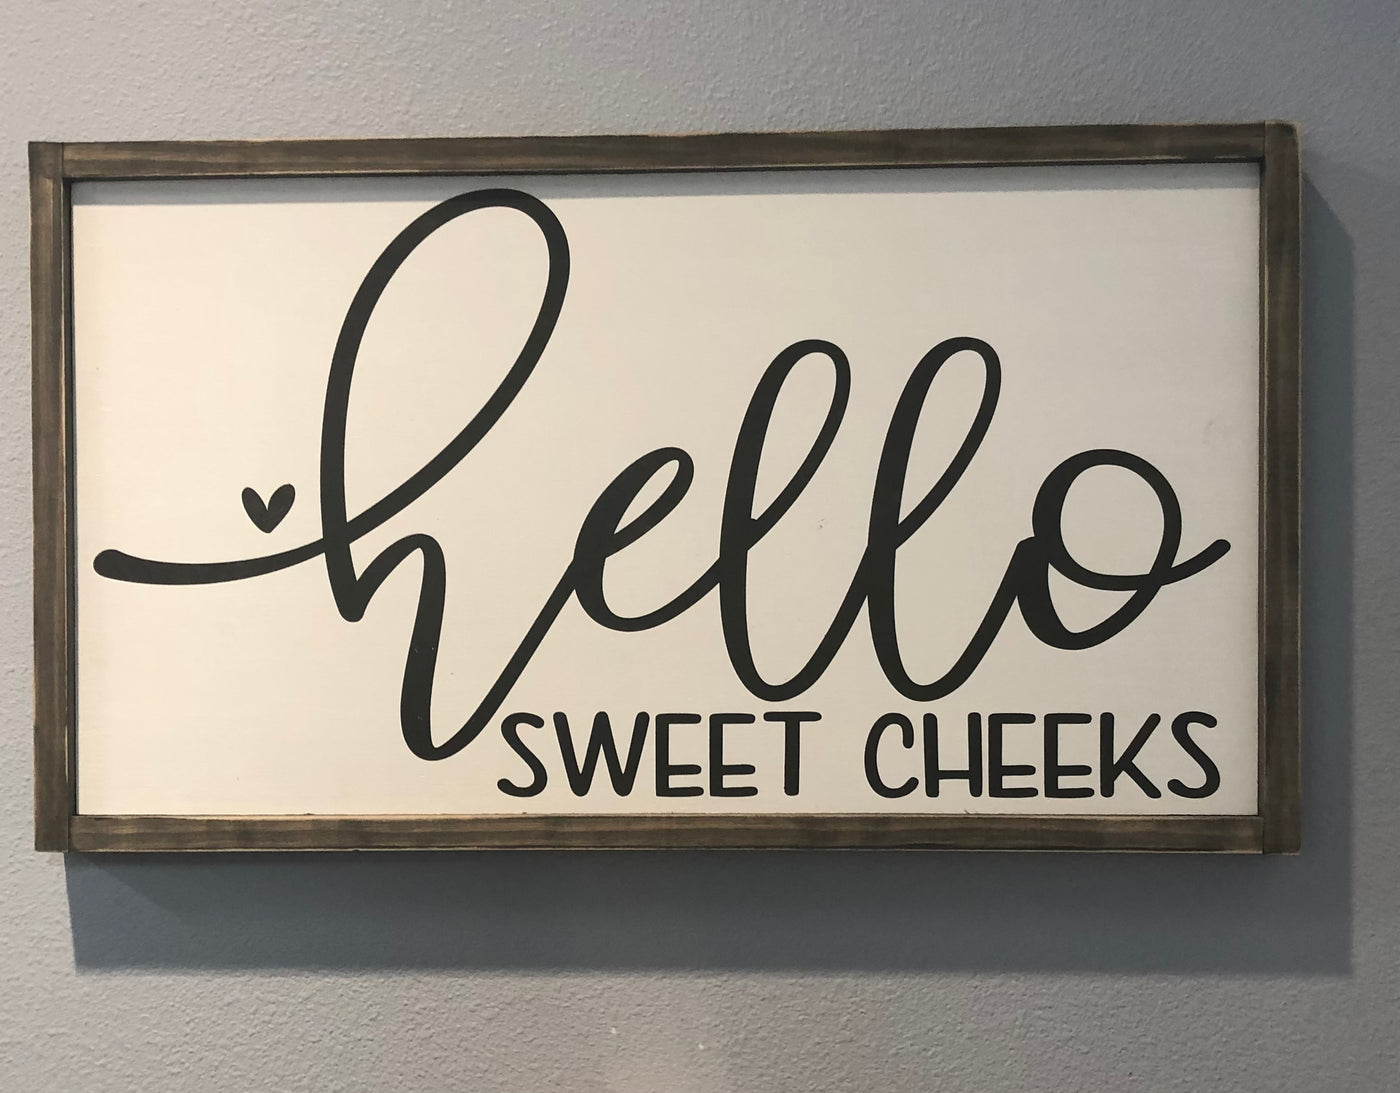 The Painted Knot Hello Sweet Cheeks Sign 15.5 in x 27.5 in